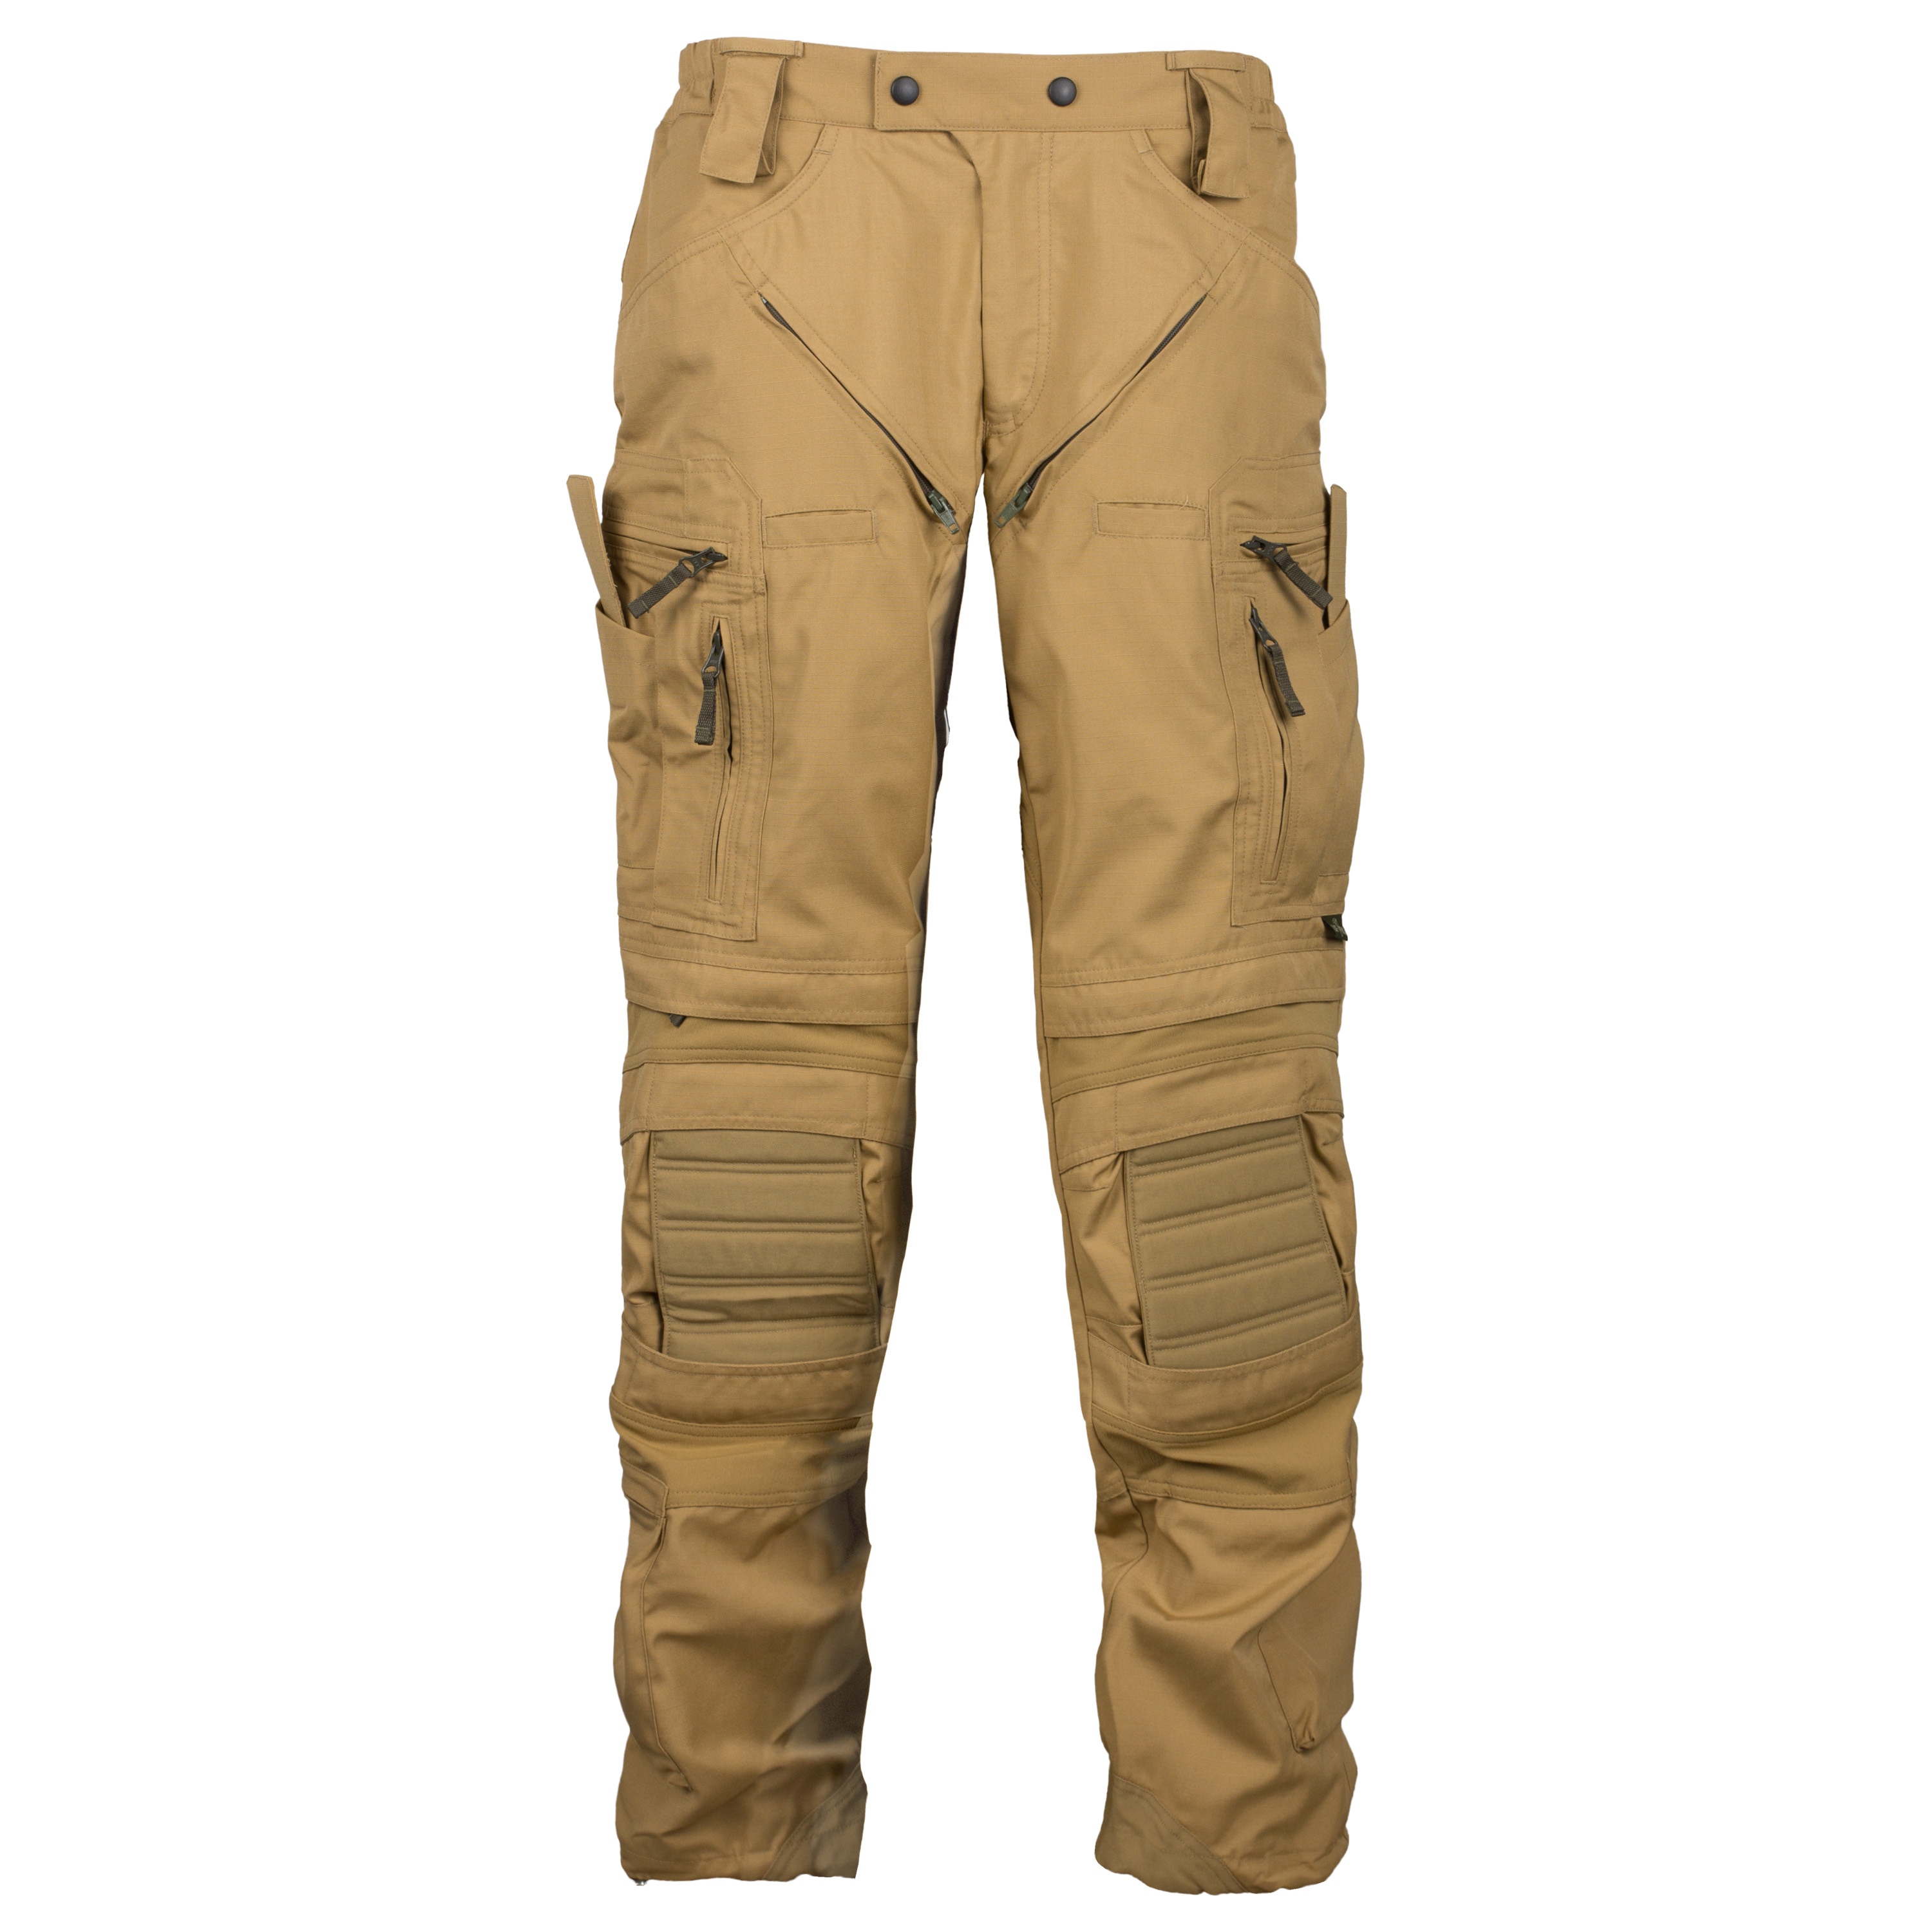 Purchase the UF Pro Combat Pants Striker HT coyote by ASMC